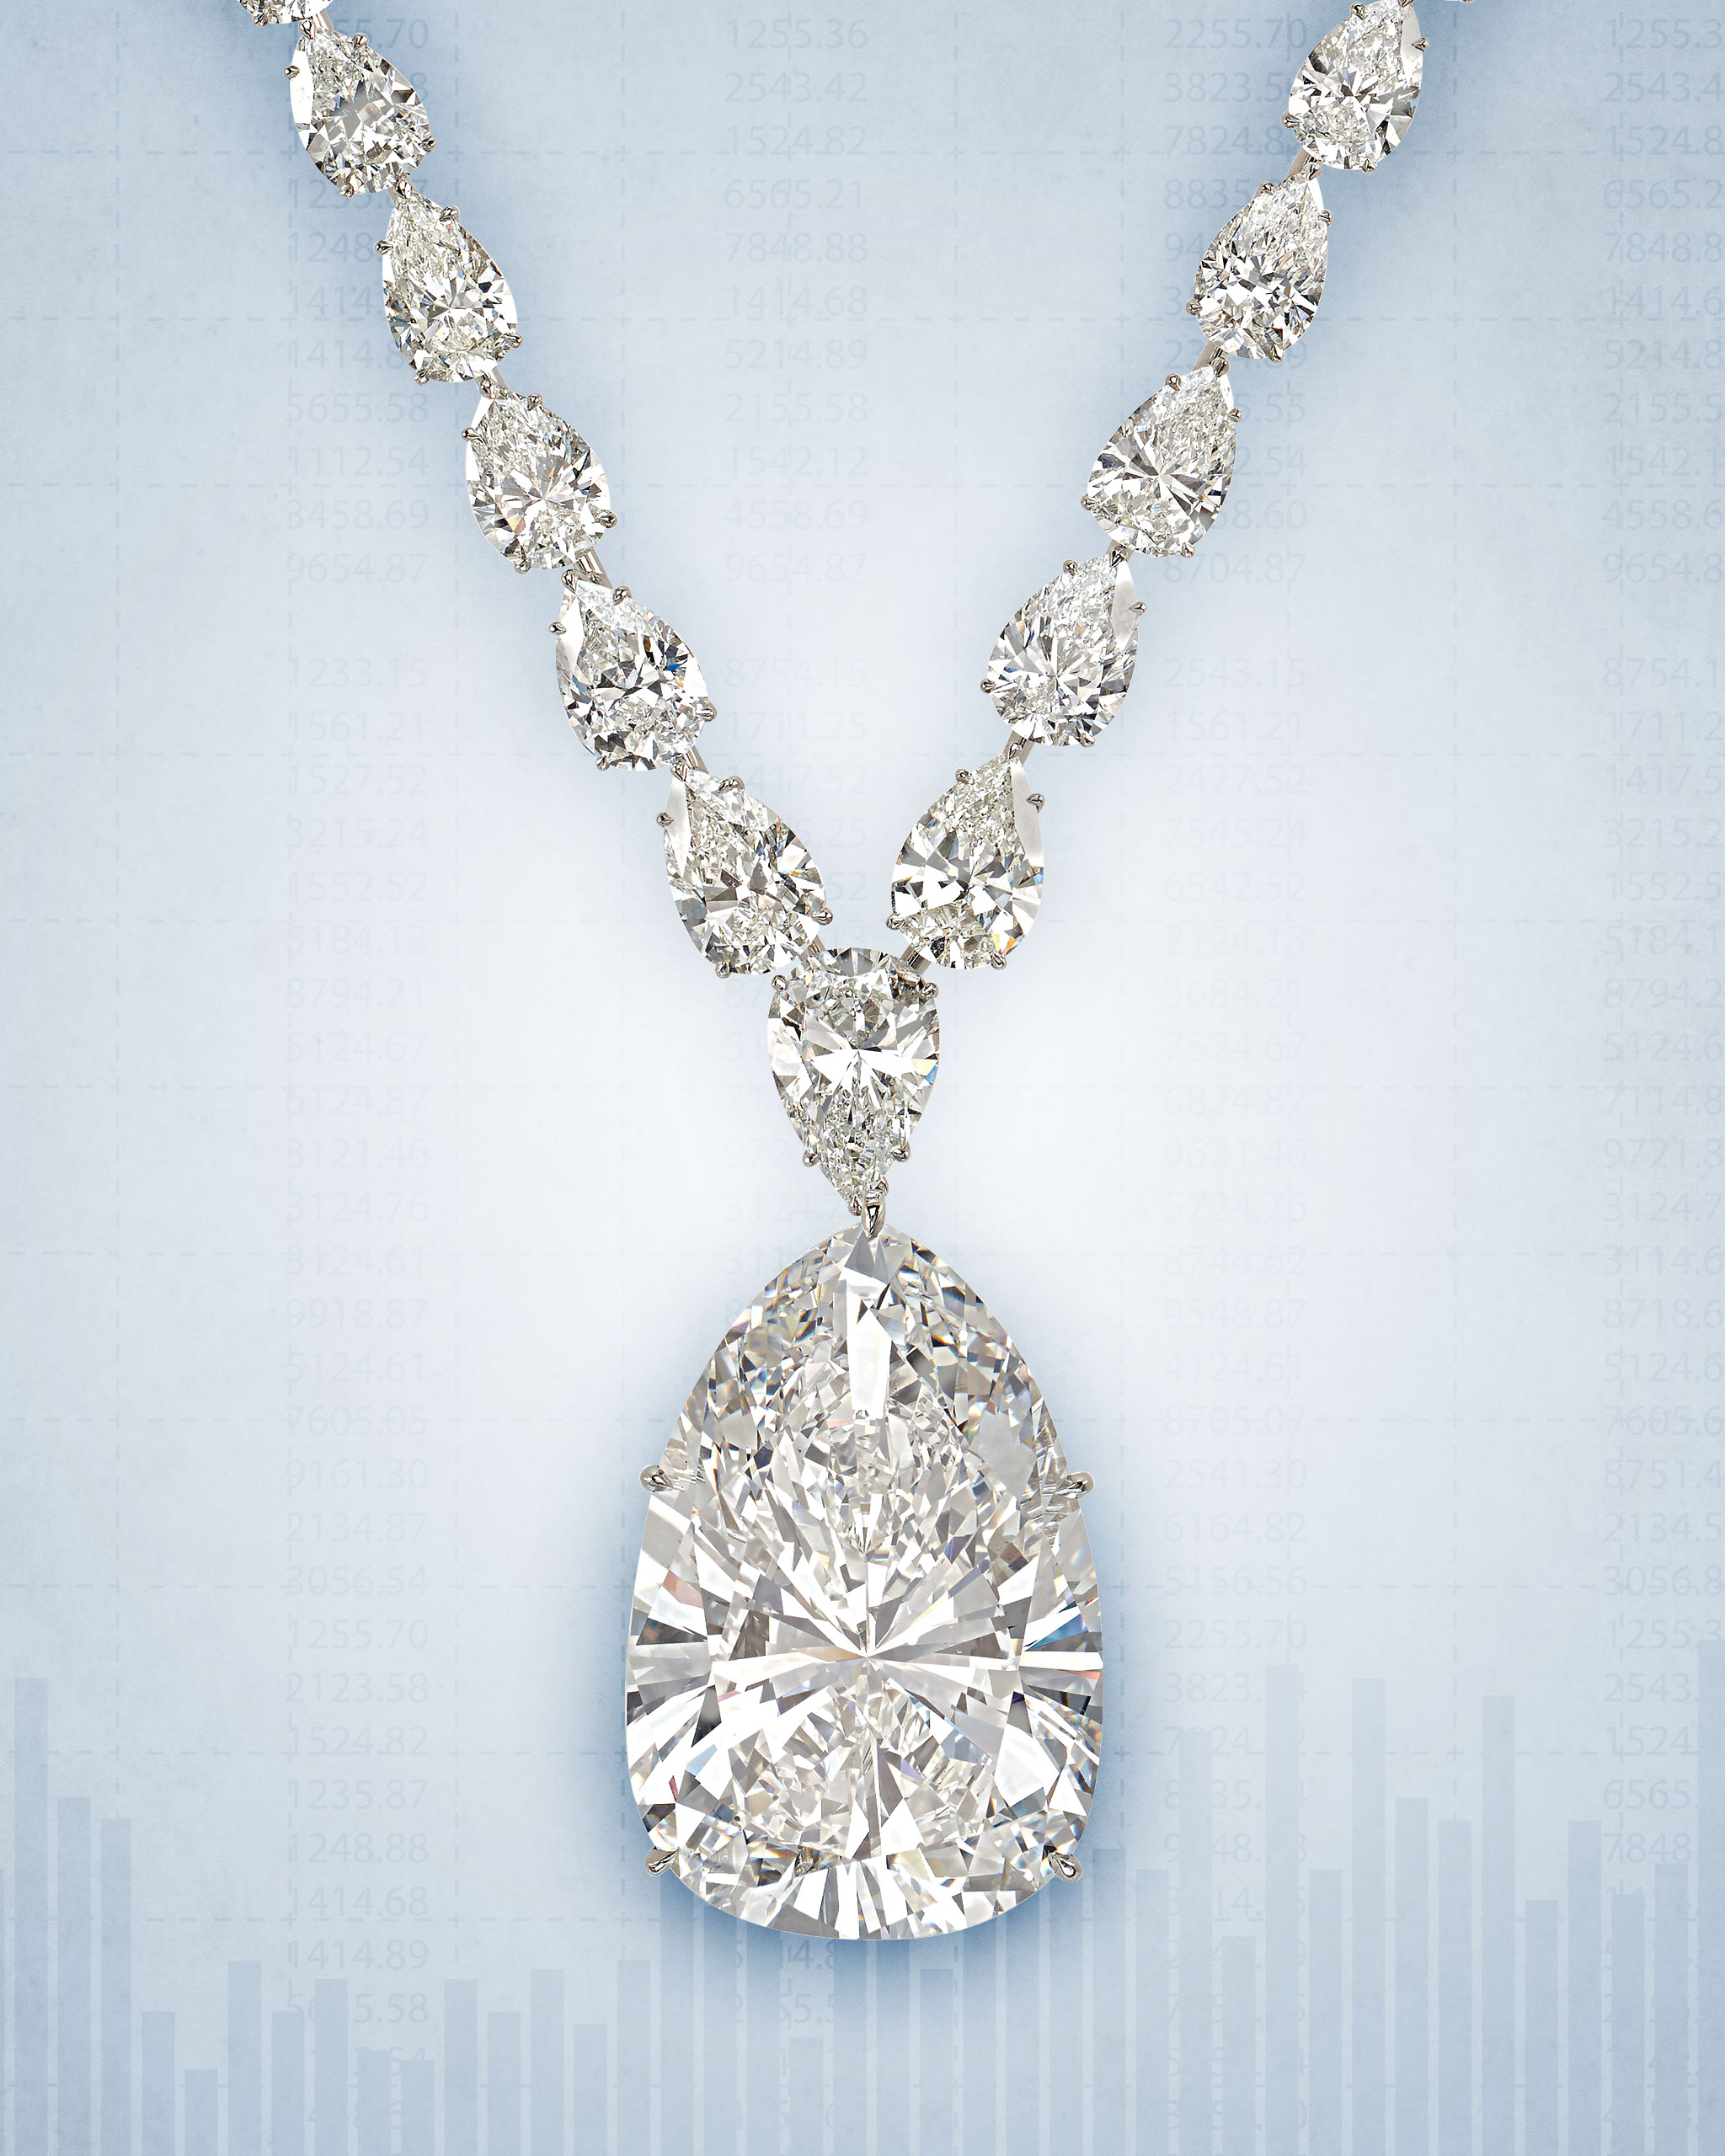 Diamond necklace with a 116-carat pear shaped diamond sold at the 2020 Christie’s jewelry auction in New York